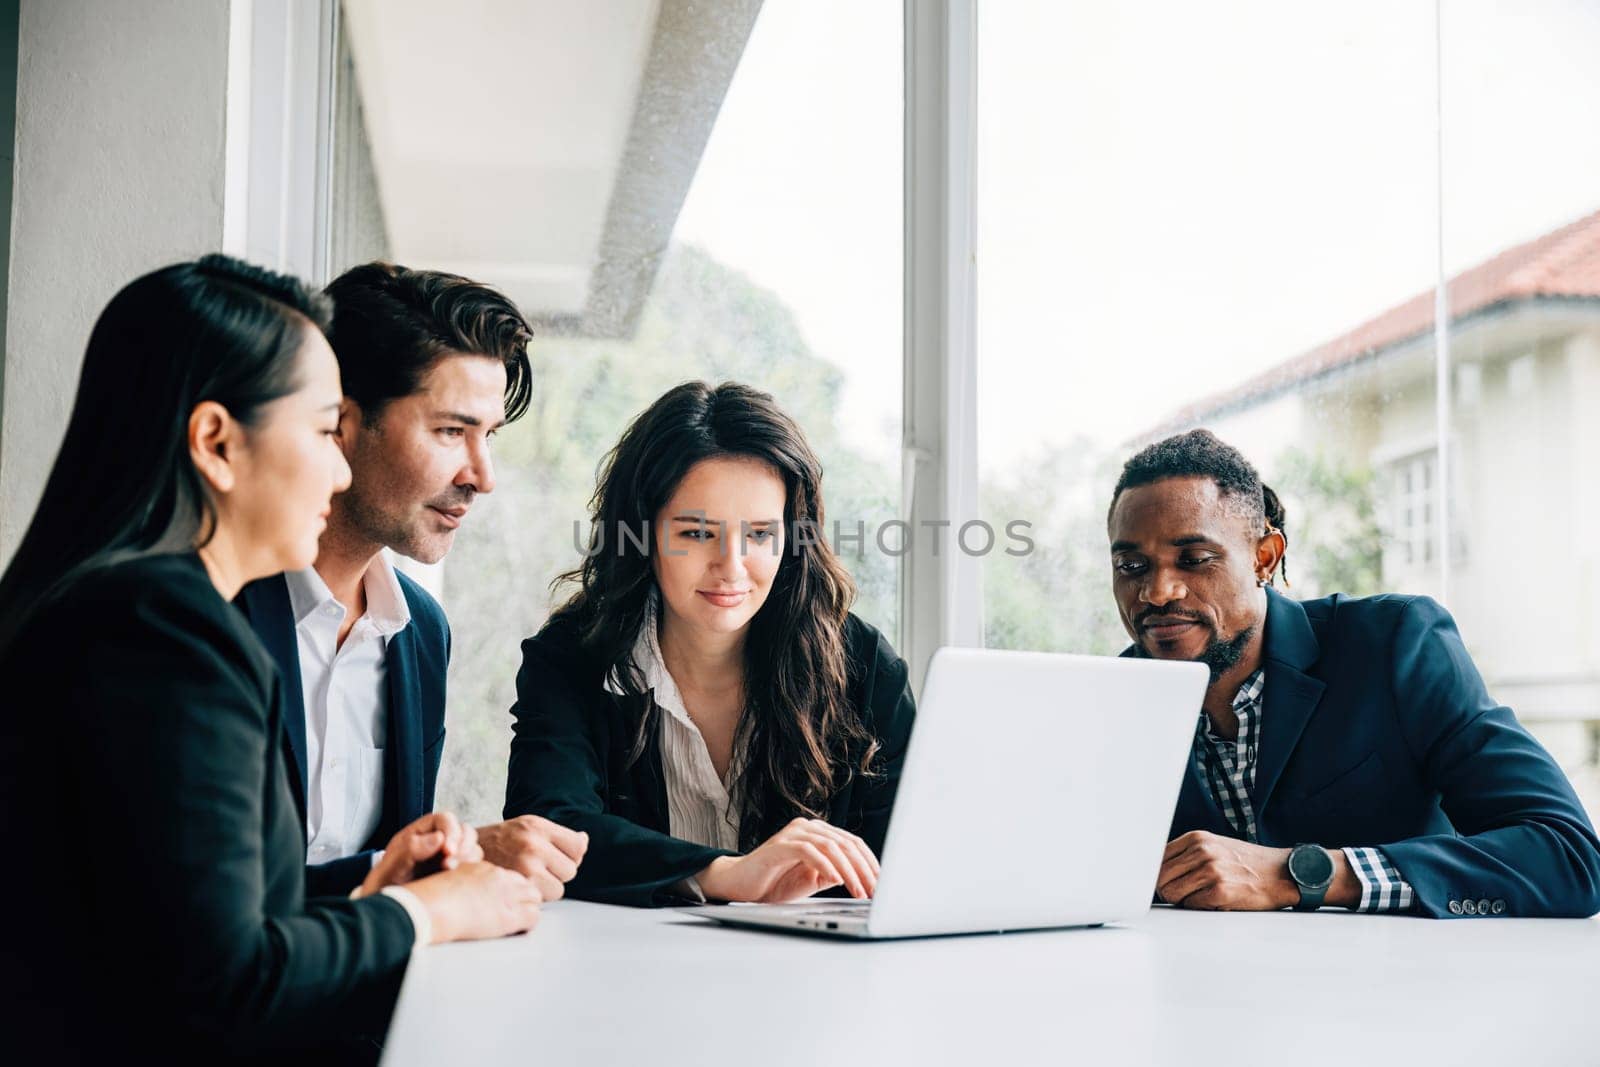 Diverse group of men and women in business collaborates in meeting room use laptop. Their teamwork diversity and cooperation are evident they engage in discussion planning and strategizing for success by Sorapop